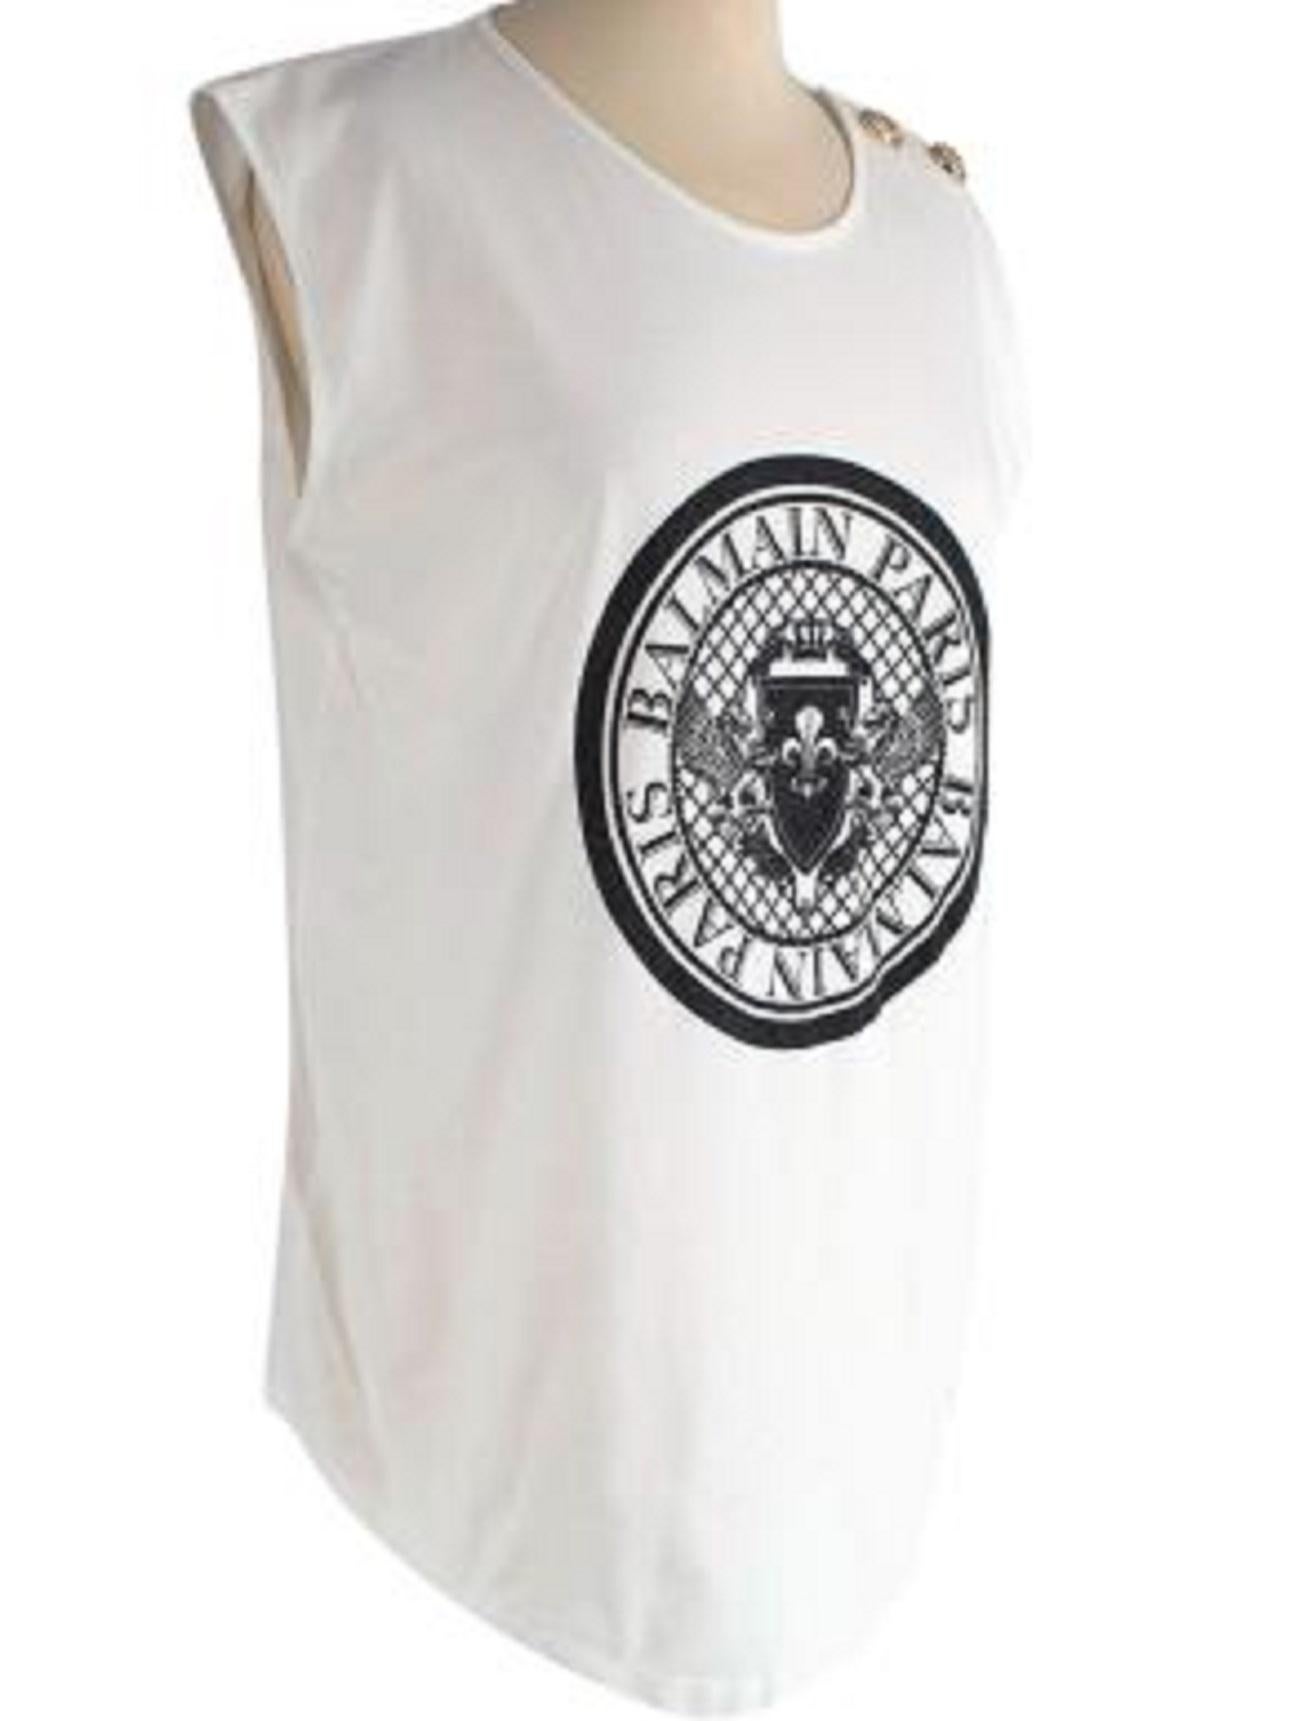 Balmain White cotton logo t-shirt

-Black logo print at the front 
-Gold tone buttons on shoulder 
-Round neckline 
-Sleeveless 
-Relaxed fit 

Material: 

100% Cotton 

Made in Portugal 

9.5/10 excellent condition

PLEASE NOTE, THESE ITEMS ARE